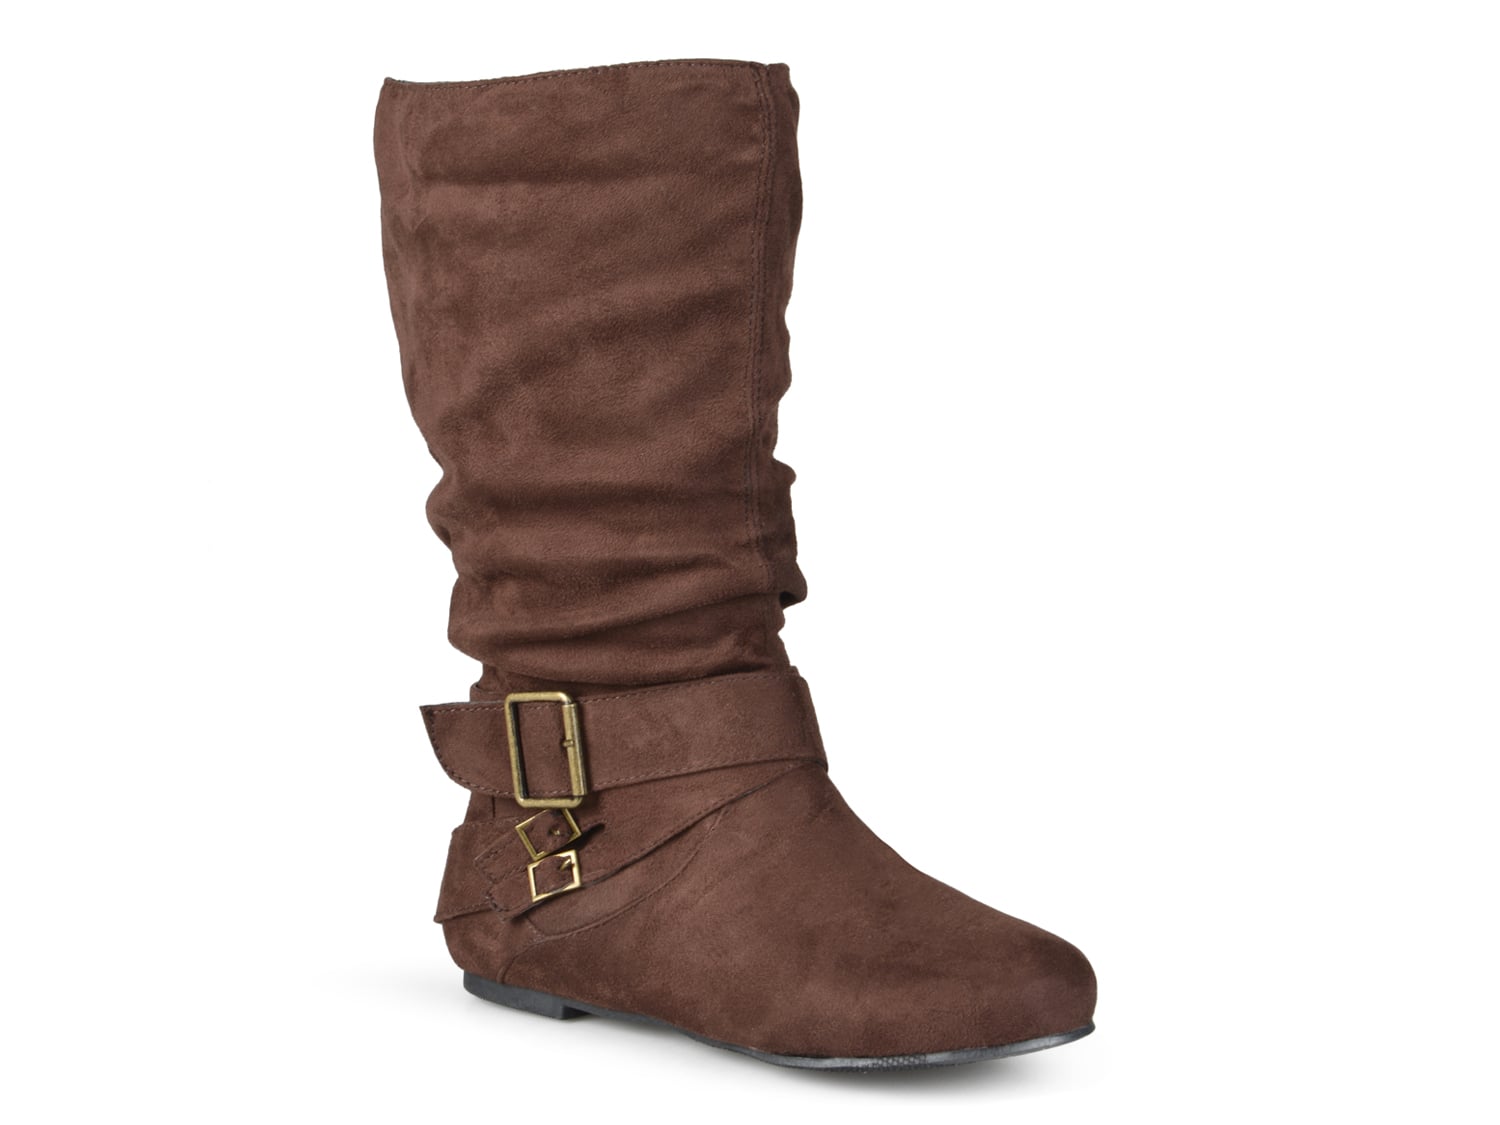 Journee Collection Shelley-6 Wide Calf Boot - Free Shipping | DSW